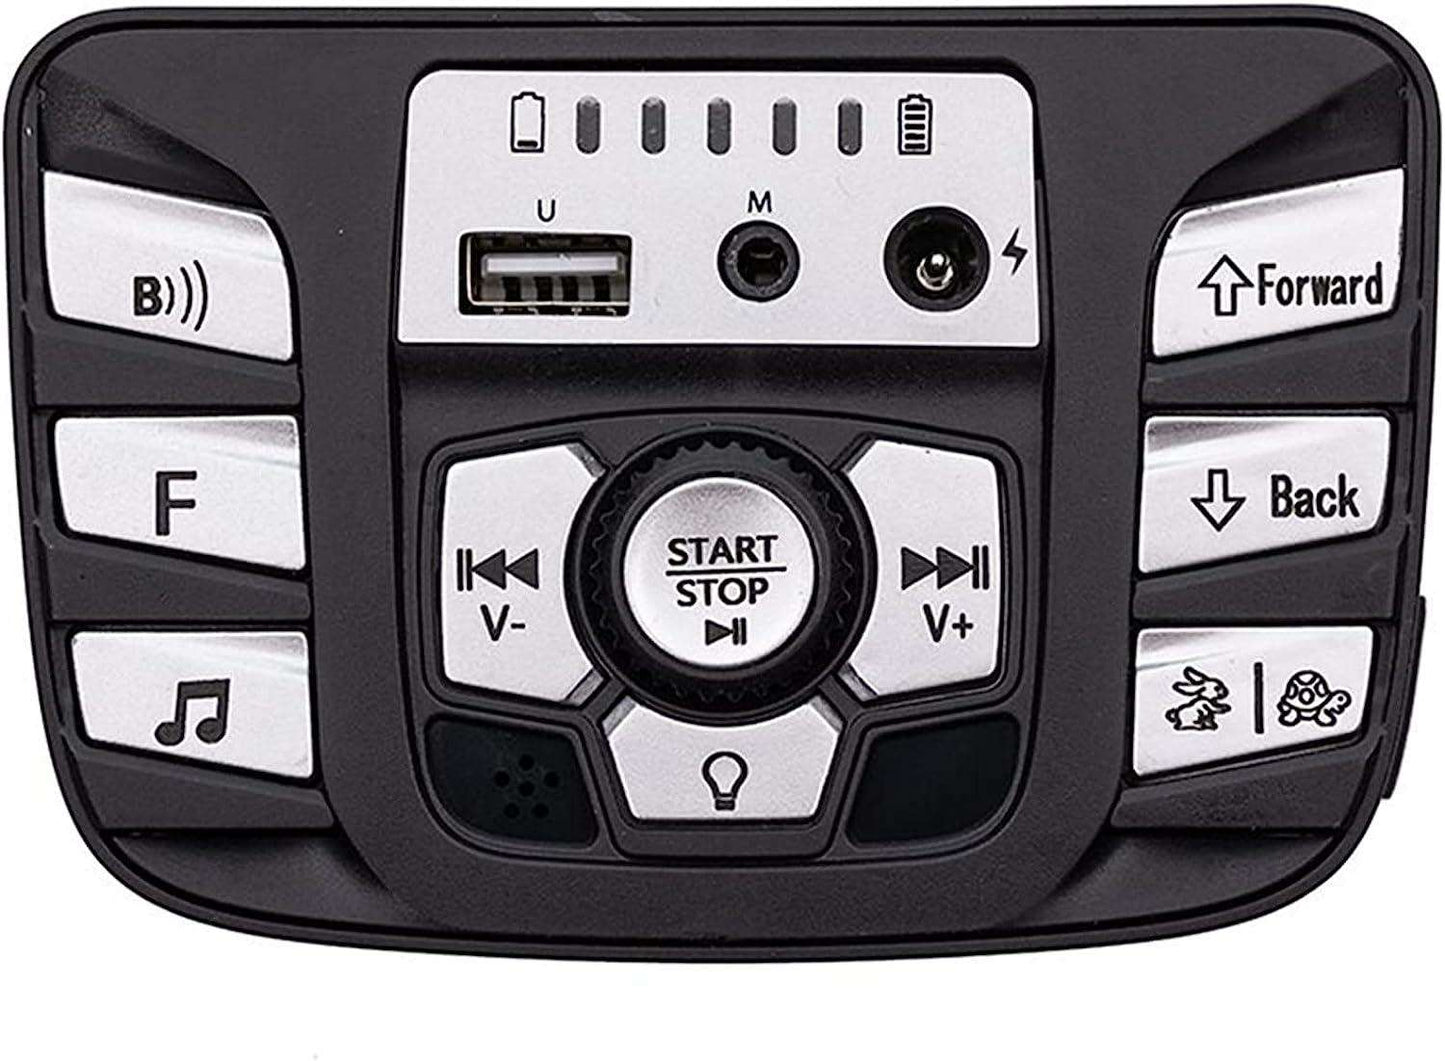 PATOYS | Central Penal music player for kids ride ons car P211 Replacement Parts PATOYS